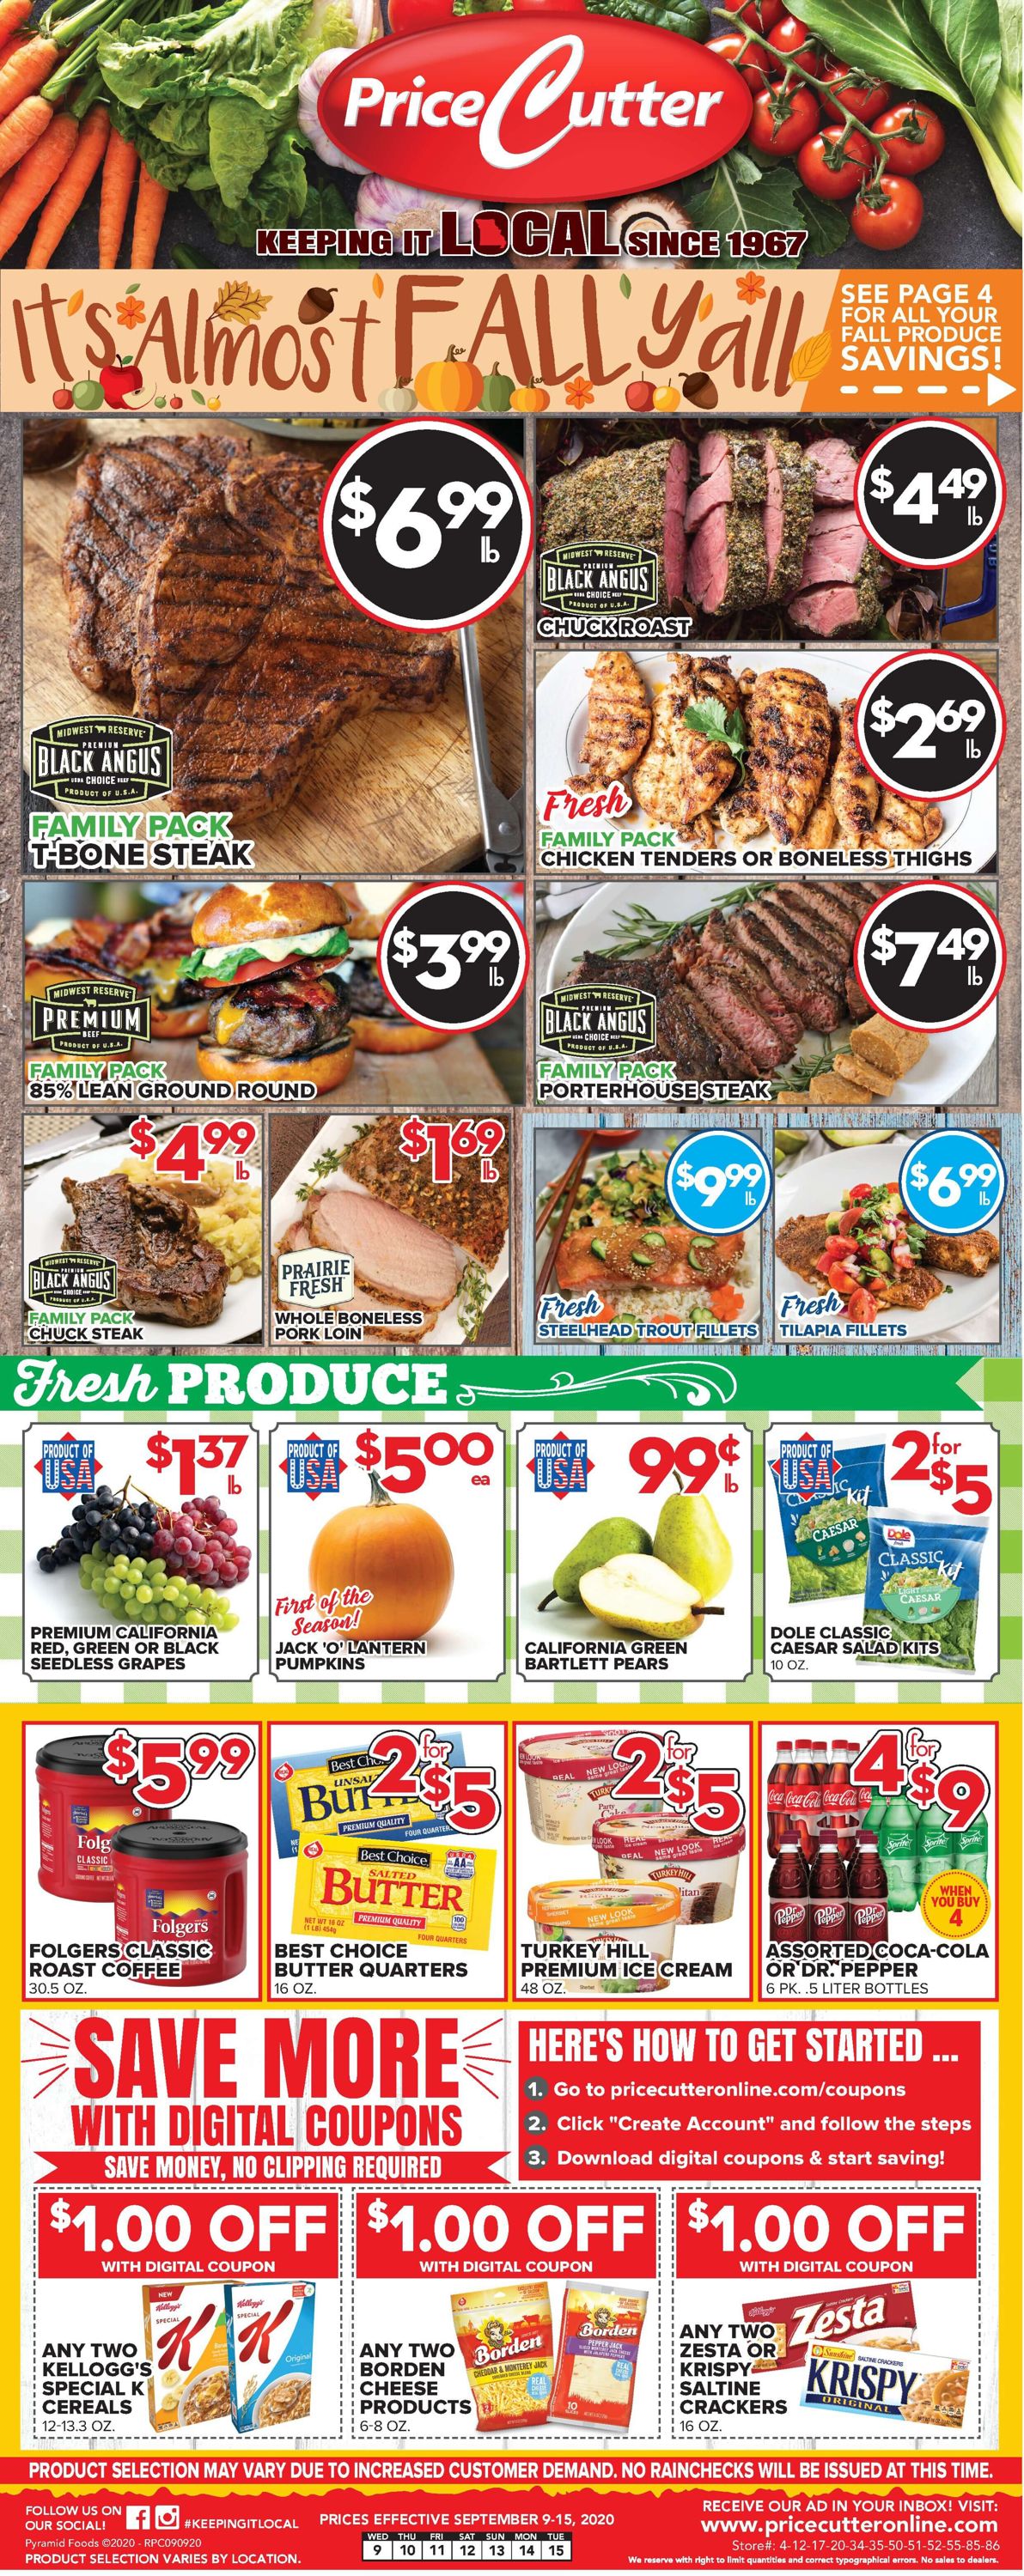 Price Cutter Weekly Ad Circular - valid 09/09-09/15/2020